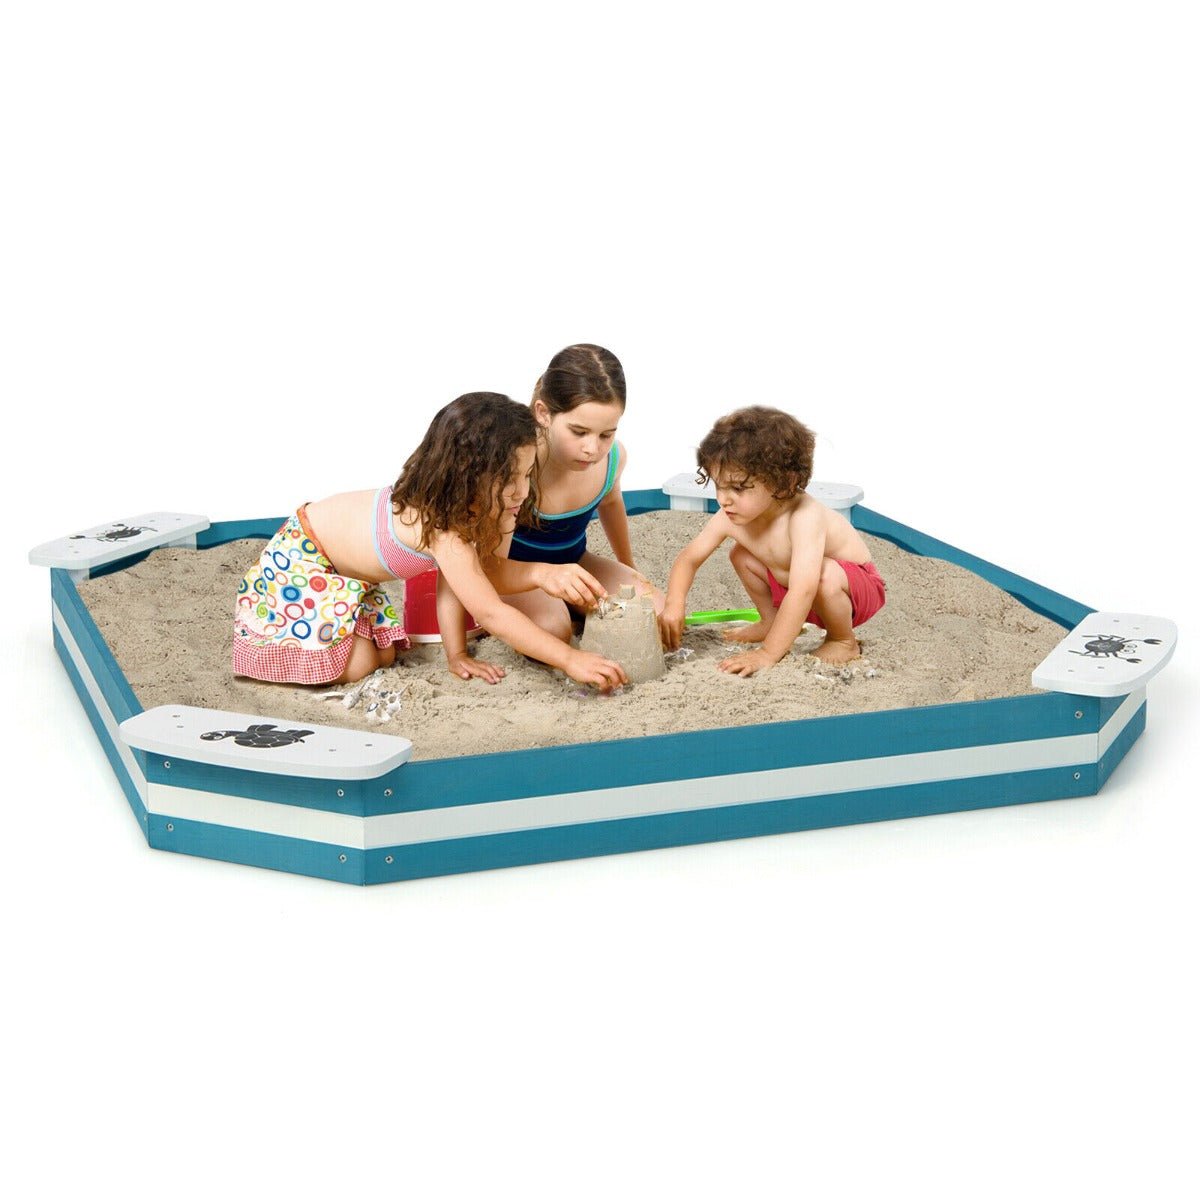 Inspire Playful Moments with a Blue White Kids Sandpit